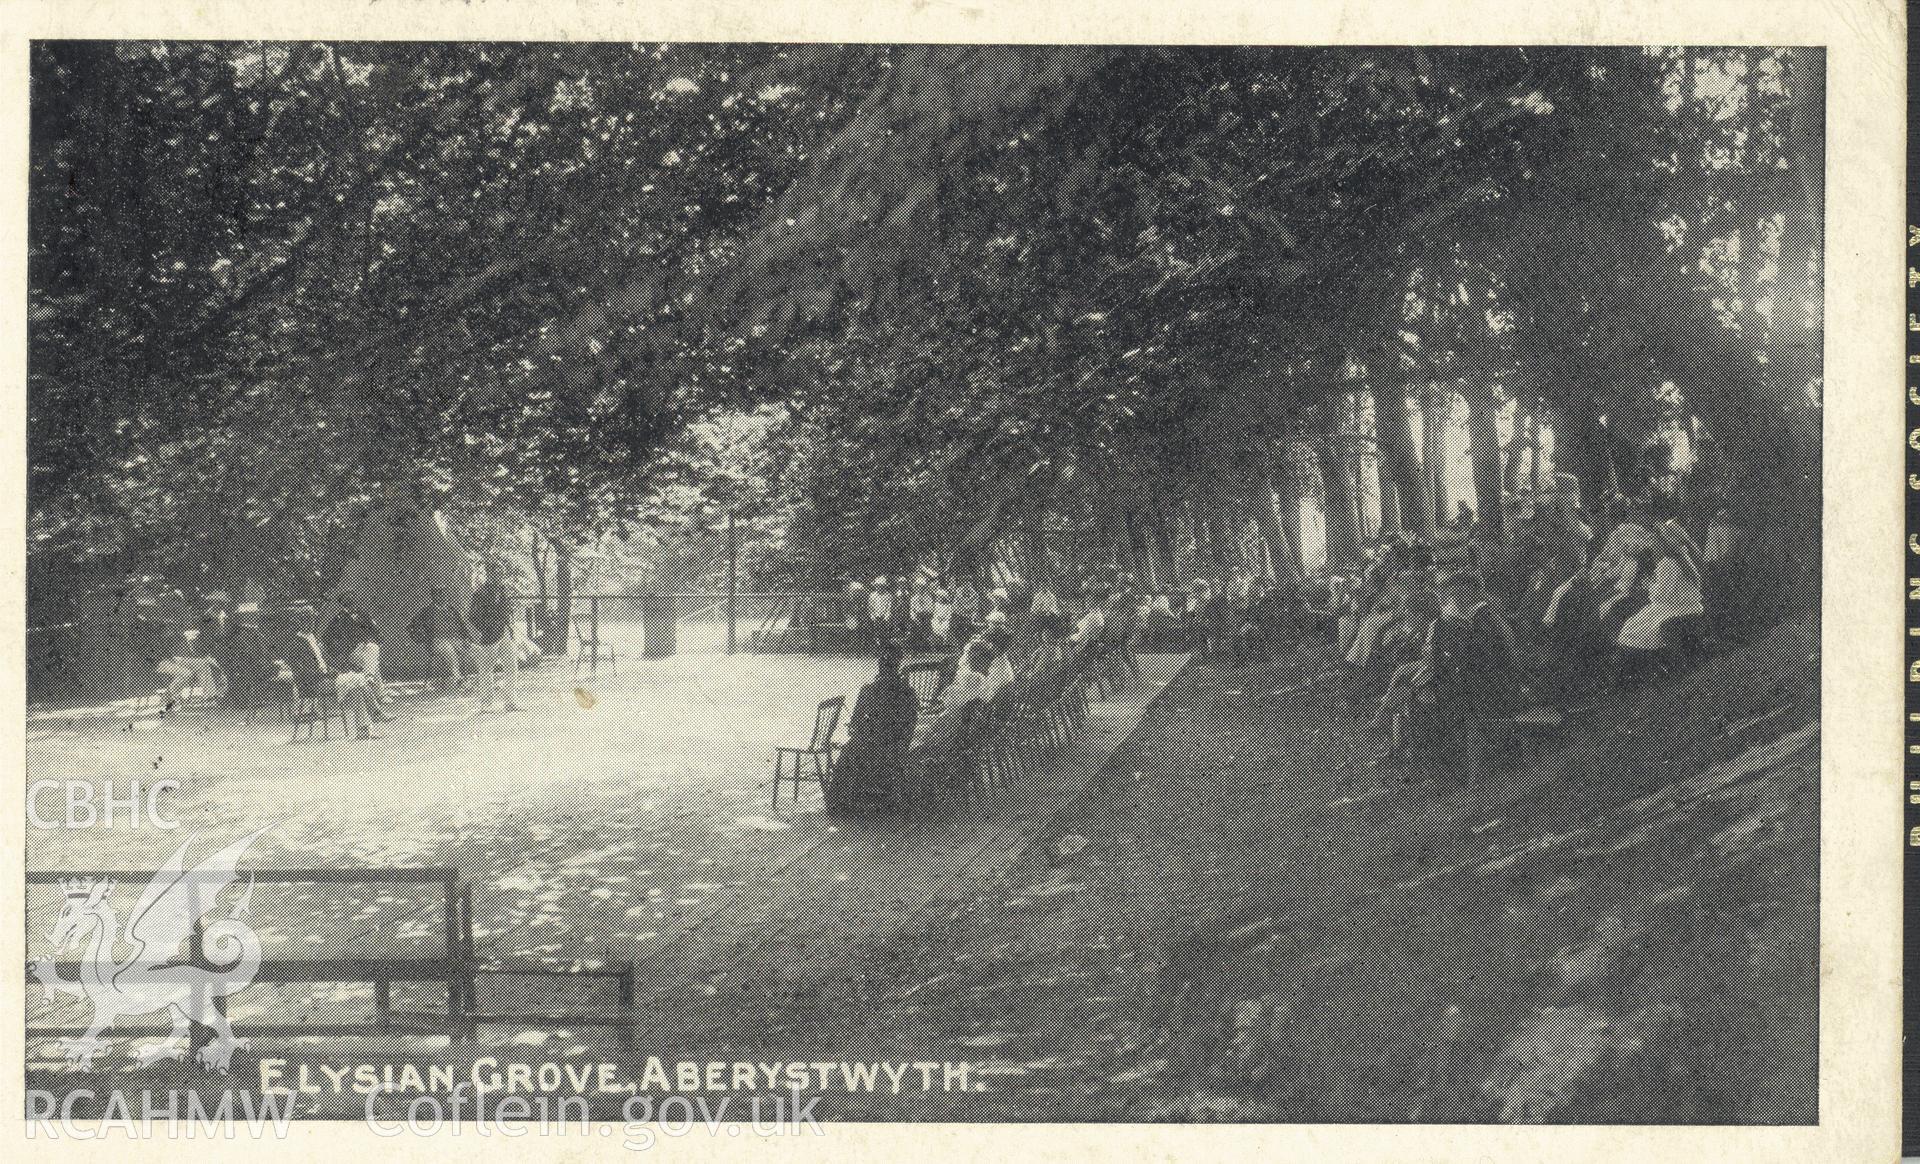 Digitised postcard image of the Elysian Grove, Aberystwyth. Produced by Parks and Gardens Data Services, from an original item in the Peter Davis Collection at Parks and Gardens UK. We hold only web-resolution images of this collection, suitable for viewing on screen and for research purposes only. We do not hold the original images, or publication quality scans.